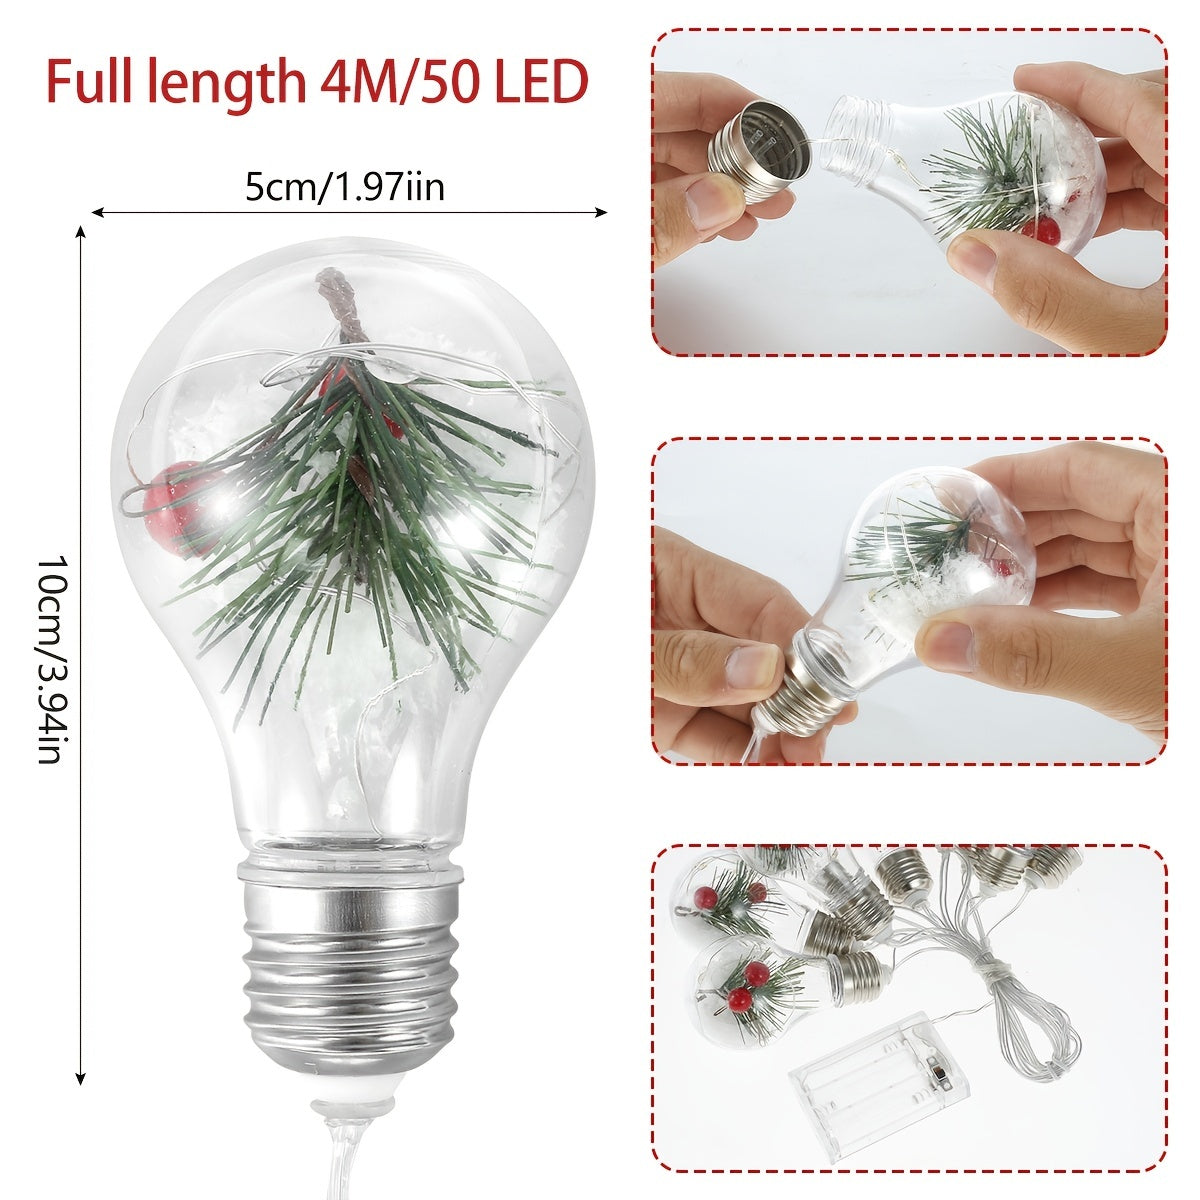 1pc 4M/157.48in 50LED Battery Powered Fairy Lights With 10 Bulbs Warm White IP55 Waterproof Copper Wire String Lamp For Christmas Wedding Party Home Bedroom Garden Shop